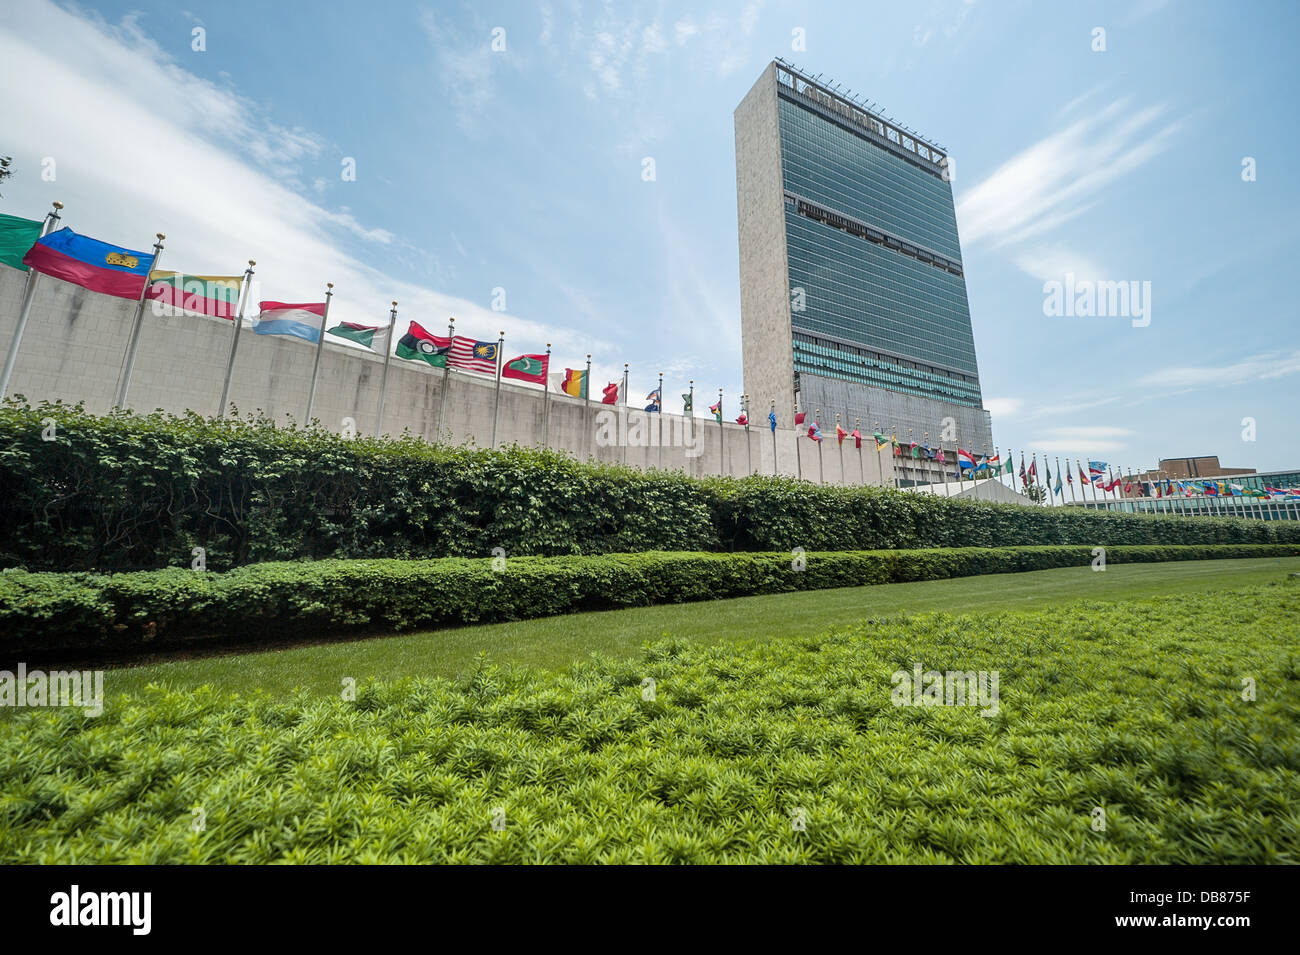 A wide angle view looking up at the United Nations building, NYC Stock Photo